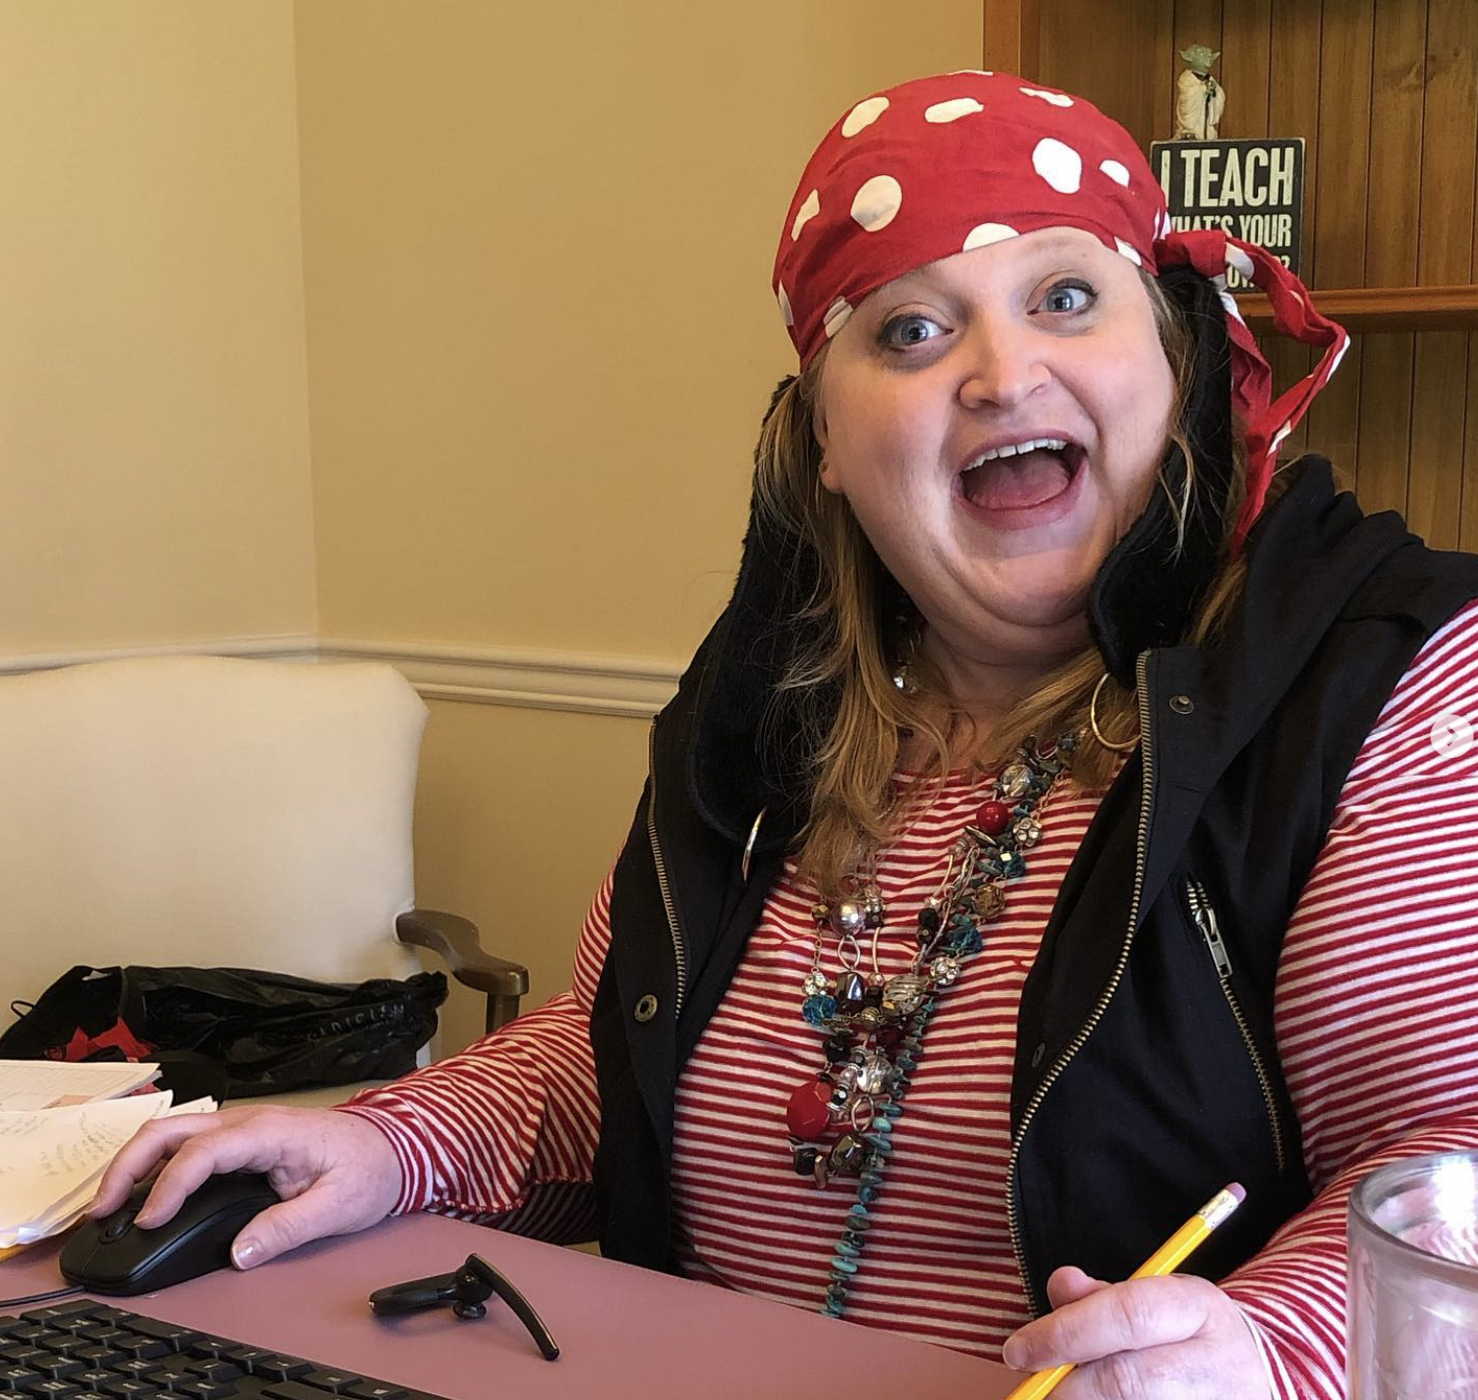 michelle nelson 5th grade teacher dressed like a pirate with big silly smile